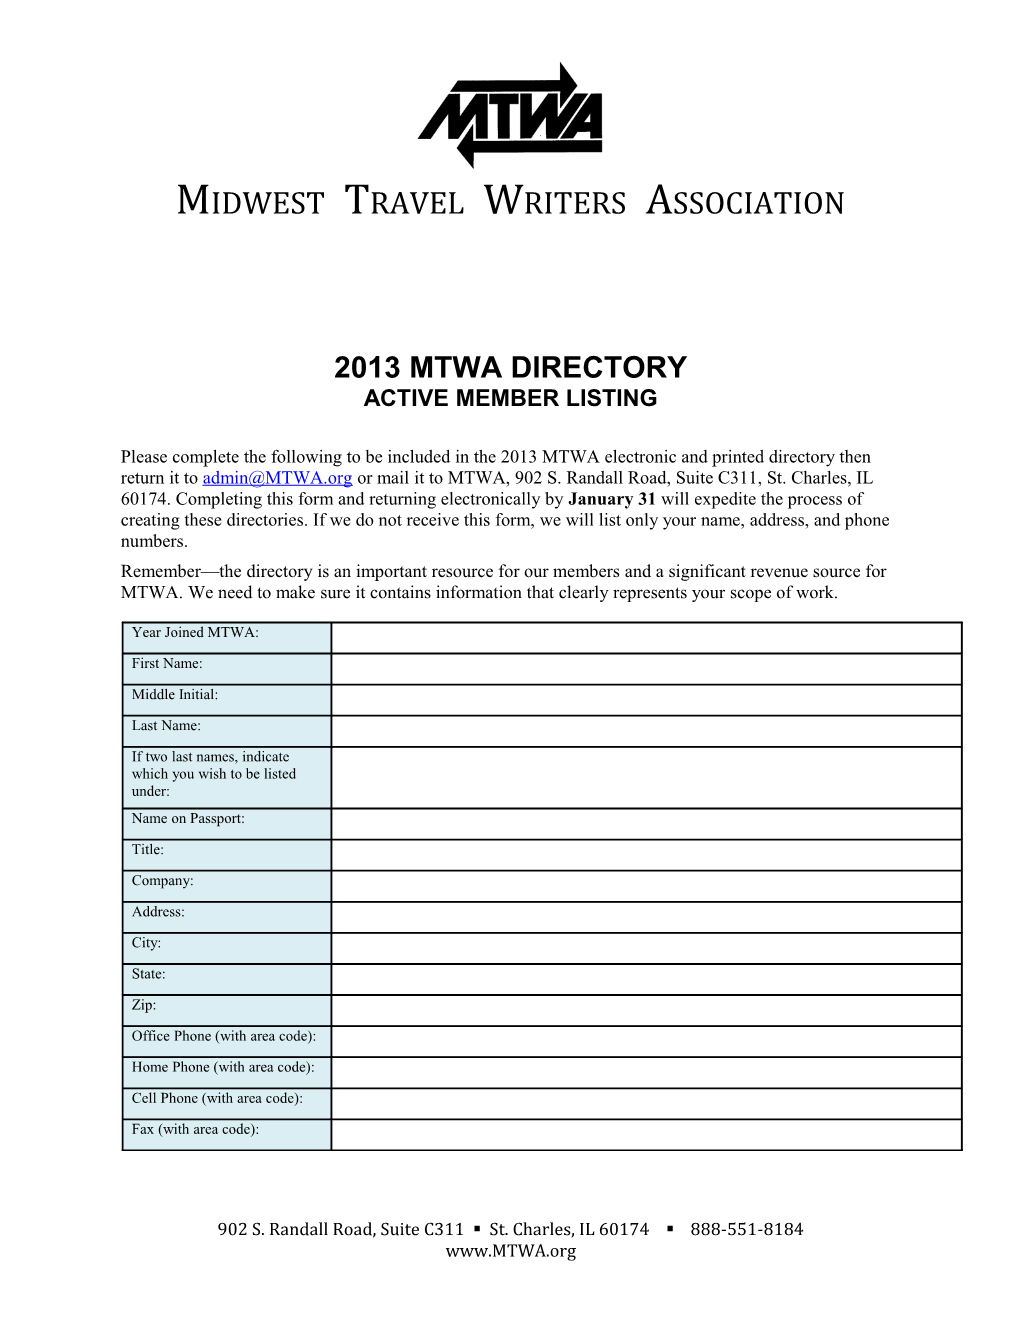 Midwest Travel Writers Association